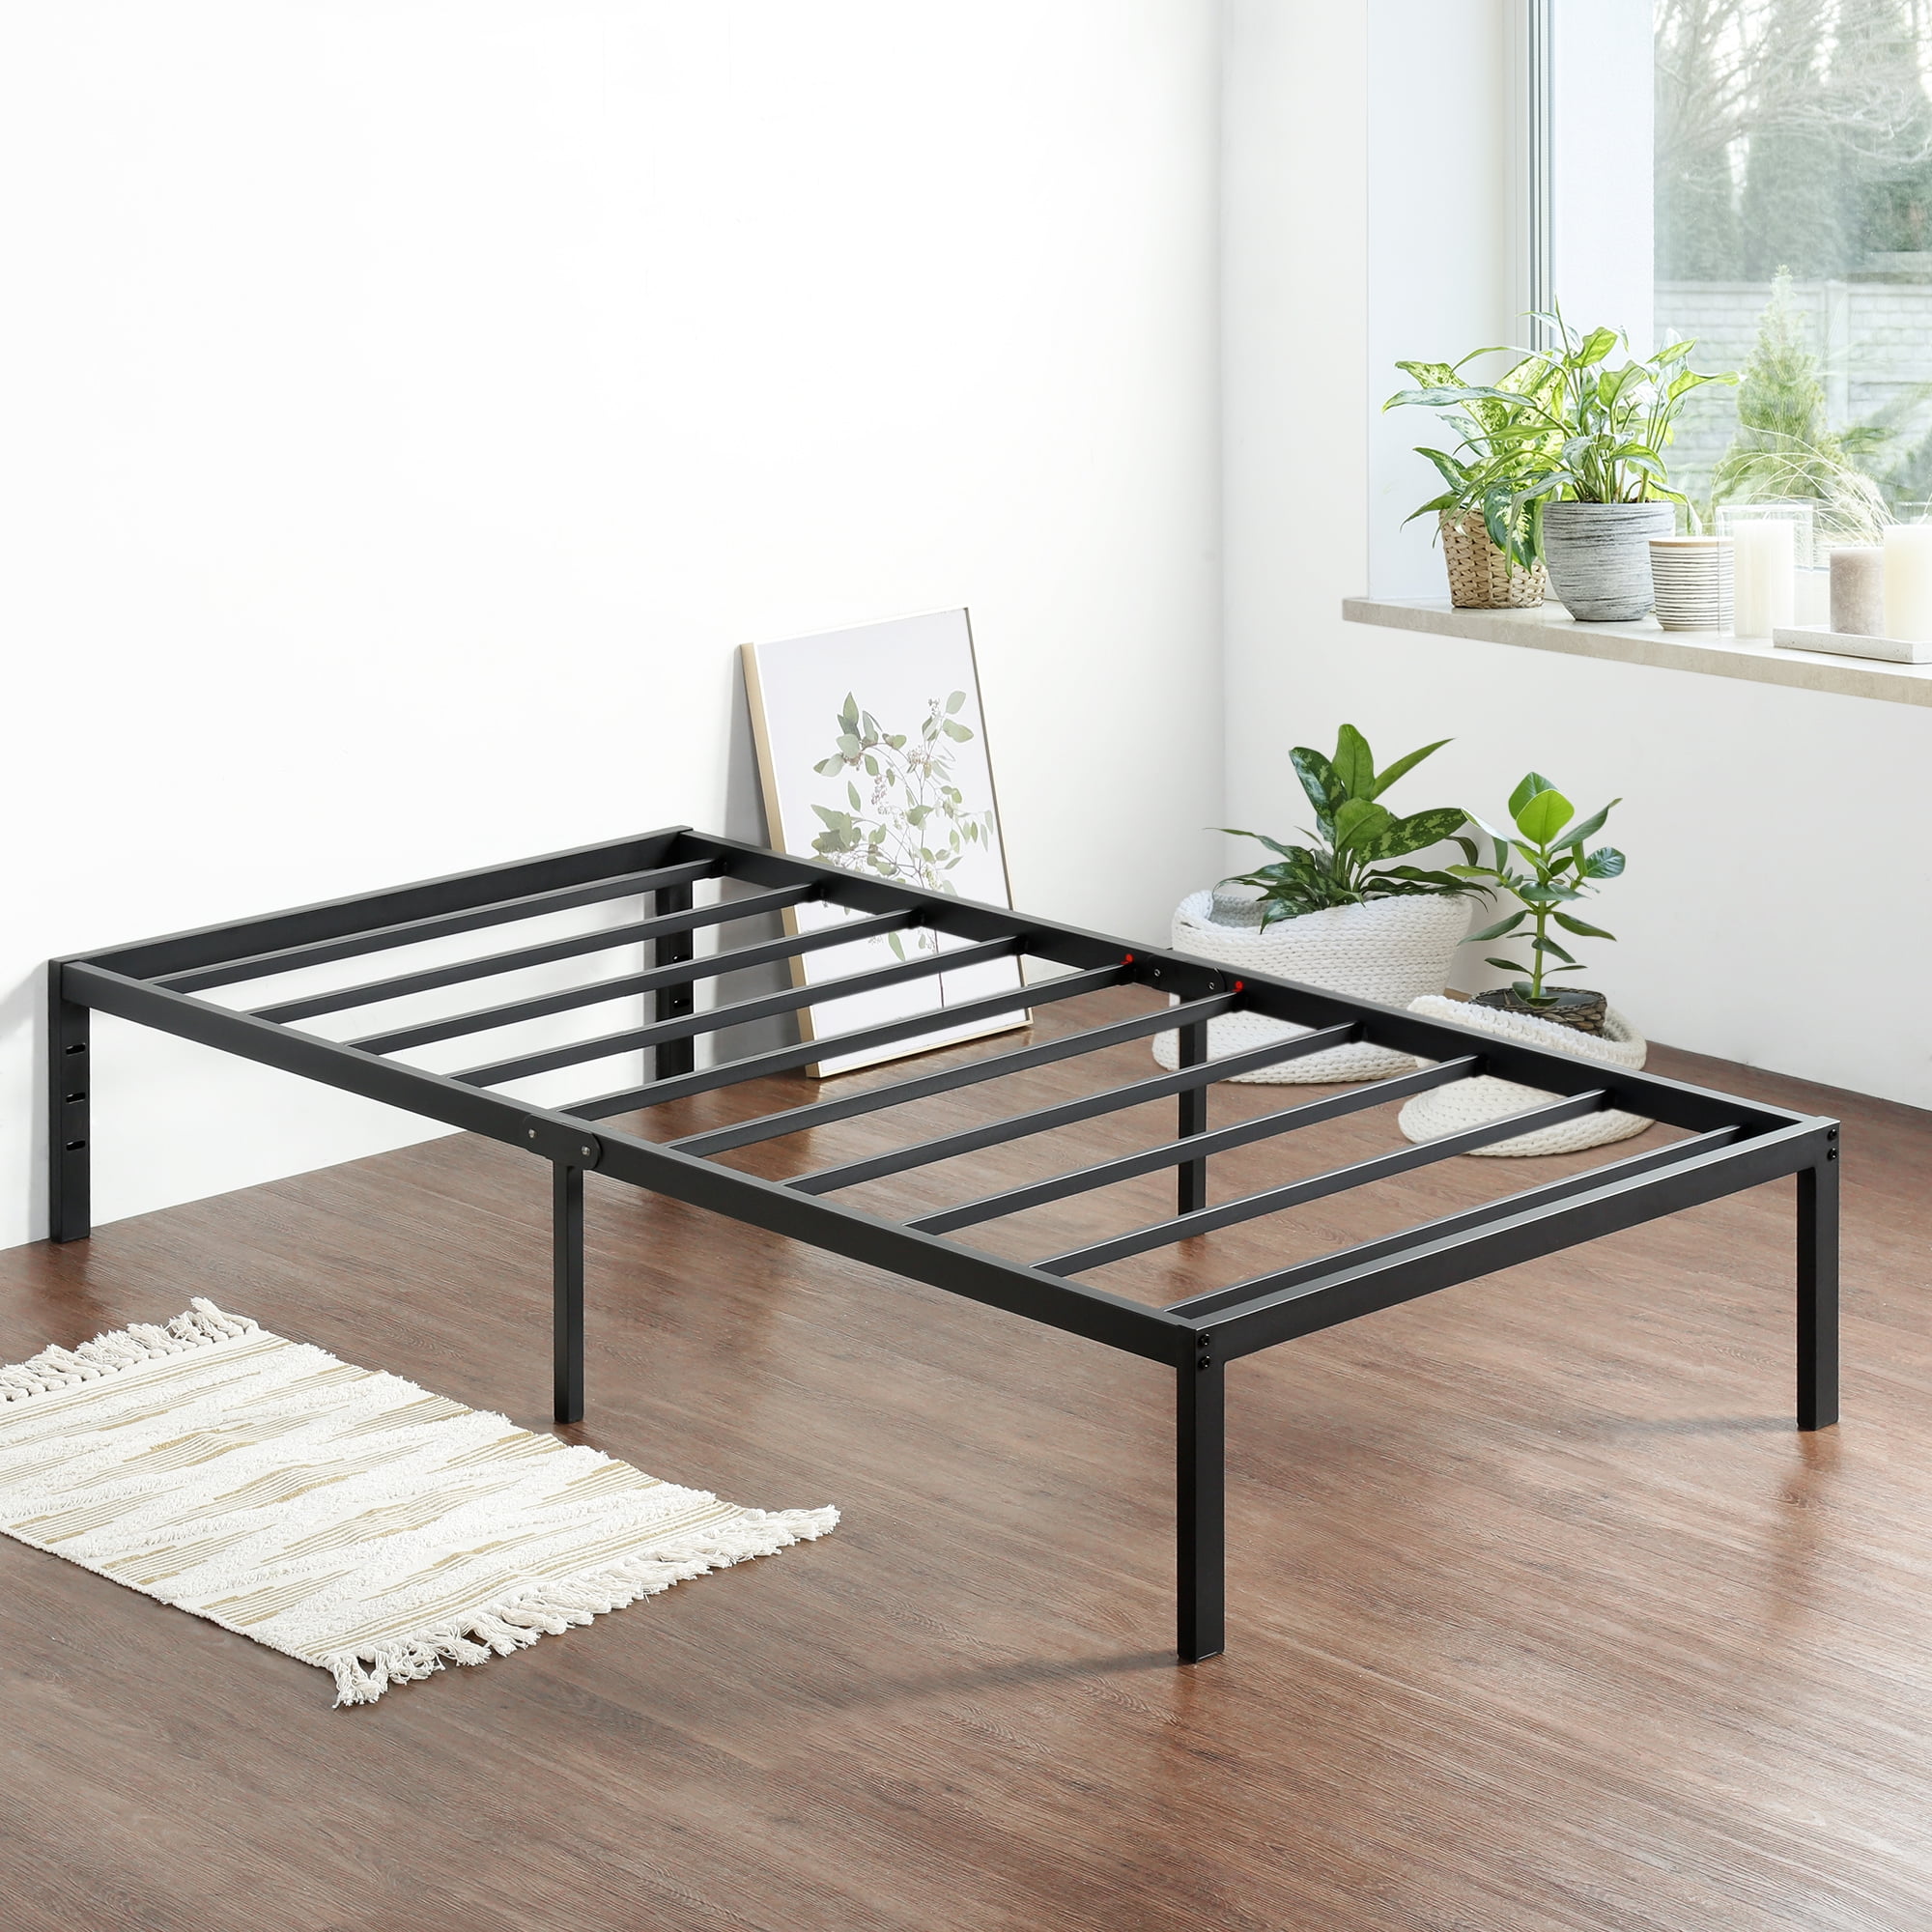 Details about   Queen King Full Twin Size 7 in Adjustable Bed Frame Platform Mattress Foundation 